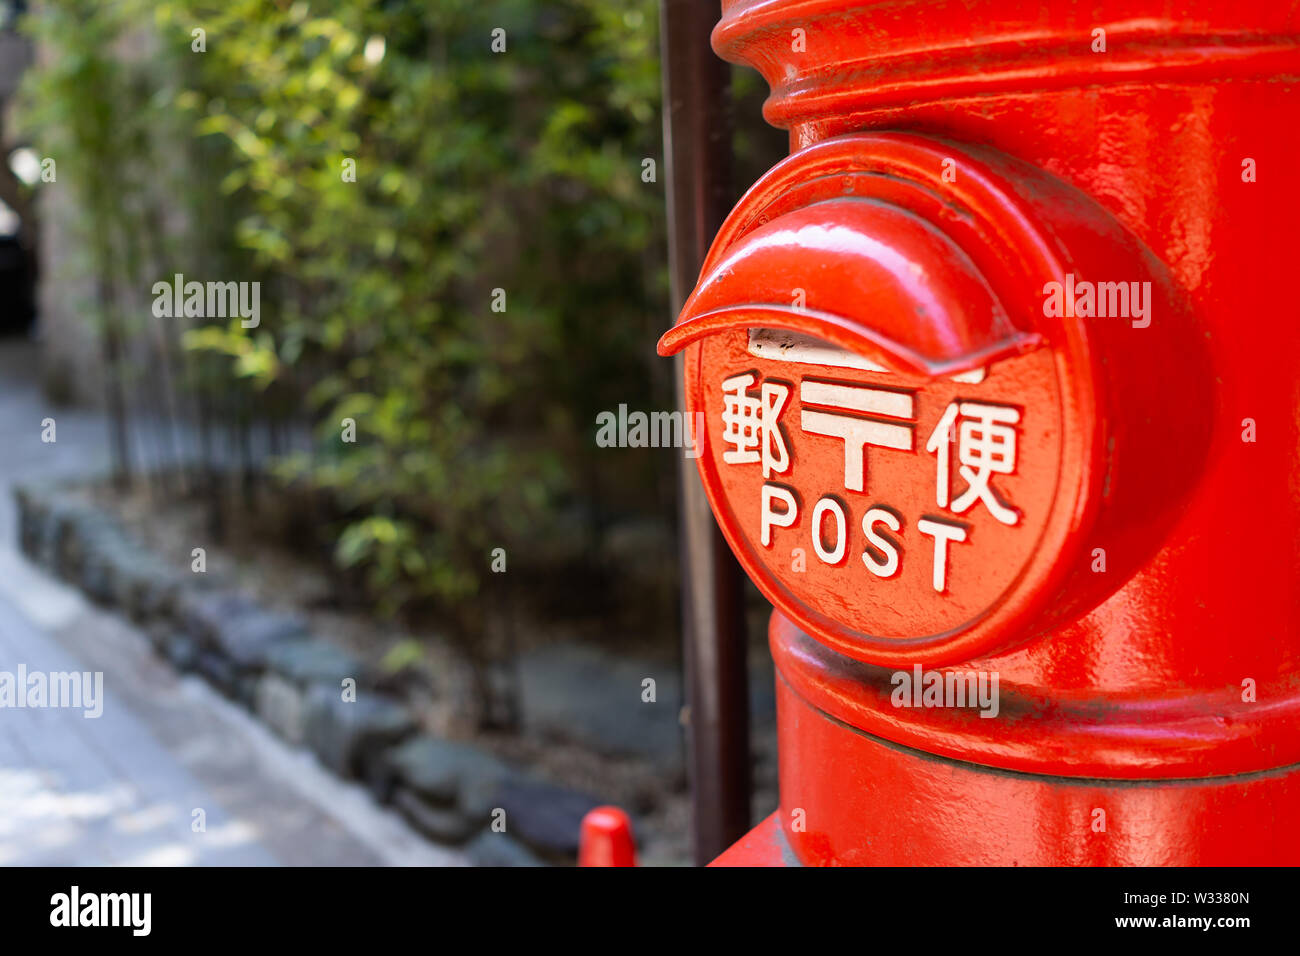 Nikko, Japan - April 4, 2019: Japan Post service mailbox painted in red in Japanese city or town of Tochigi prefecture Stock Photo